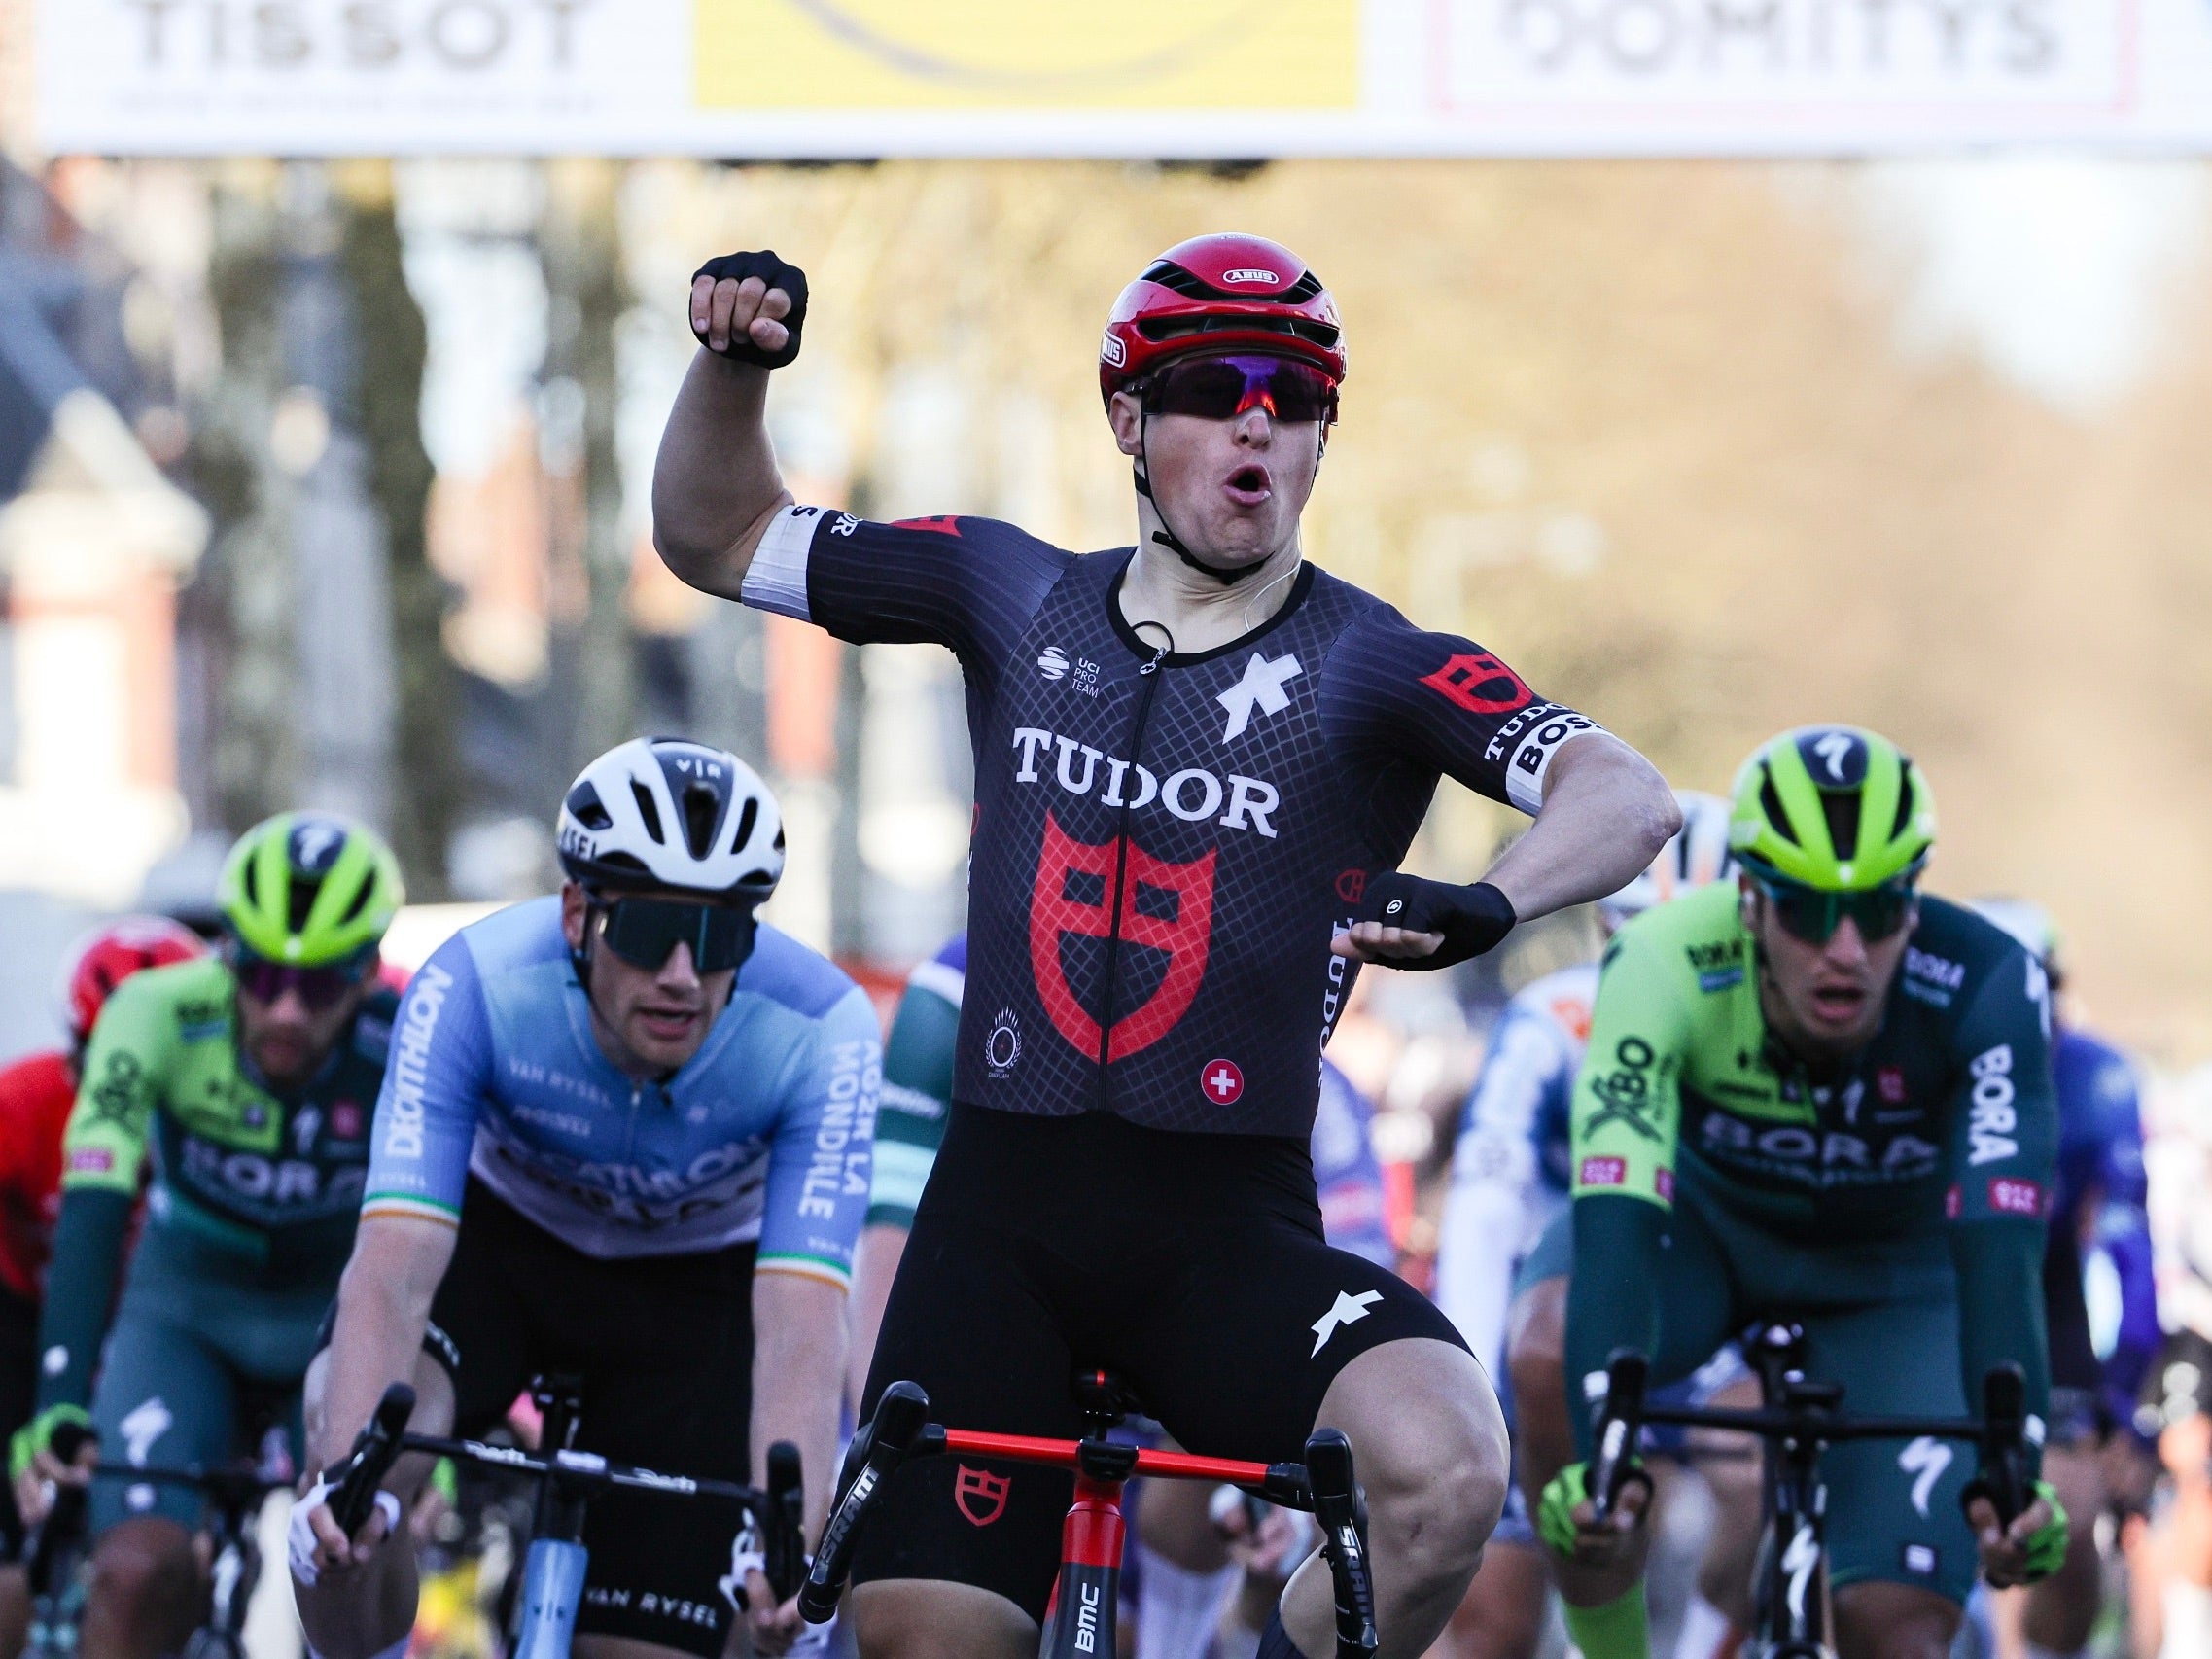 Tudor Pro Cycling scores first WorldTour stage victory in Paris-Nice